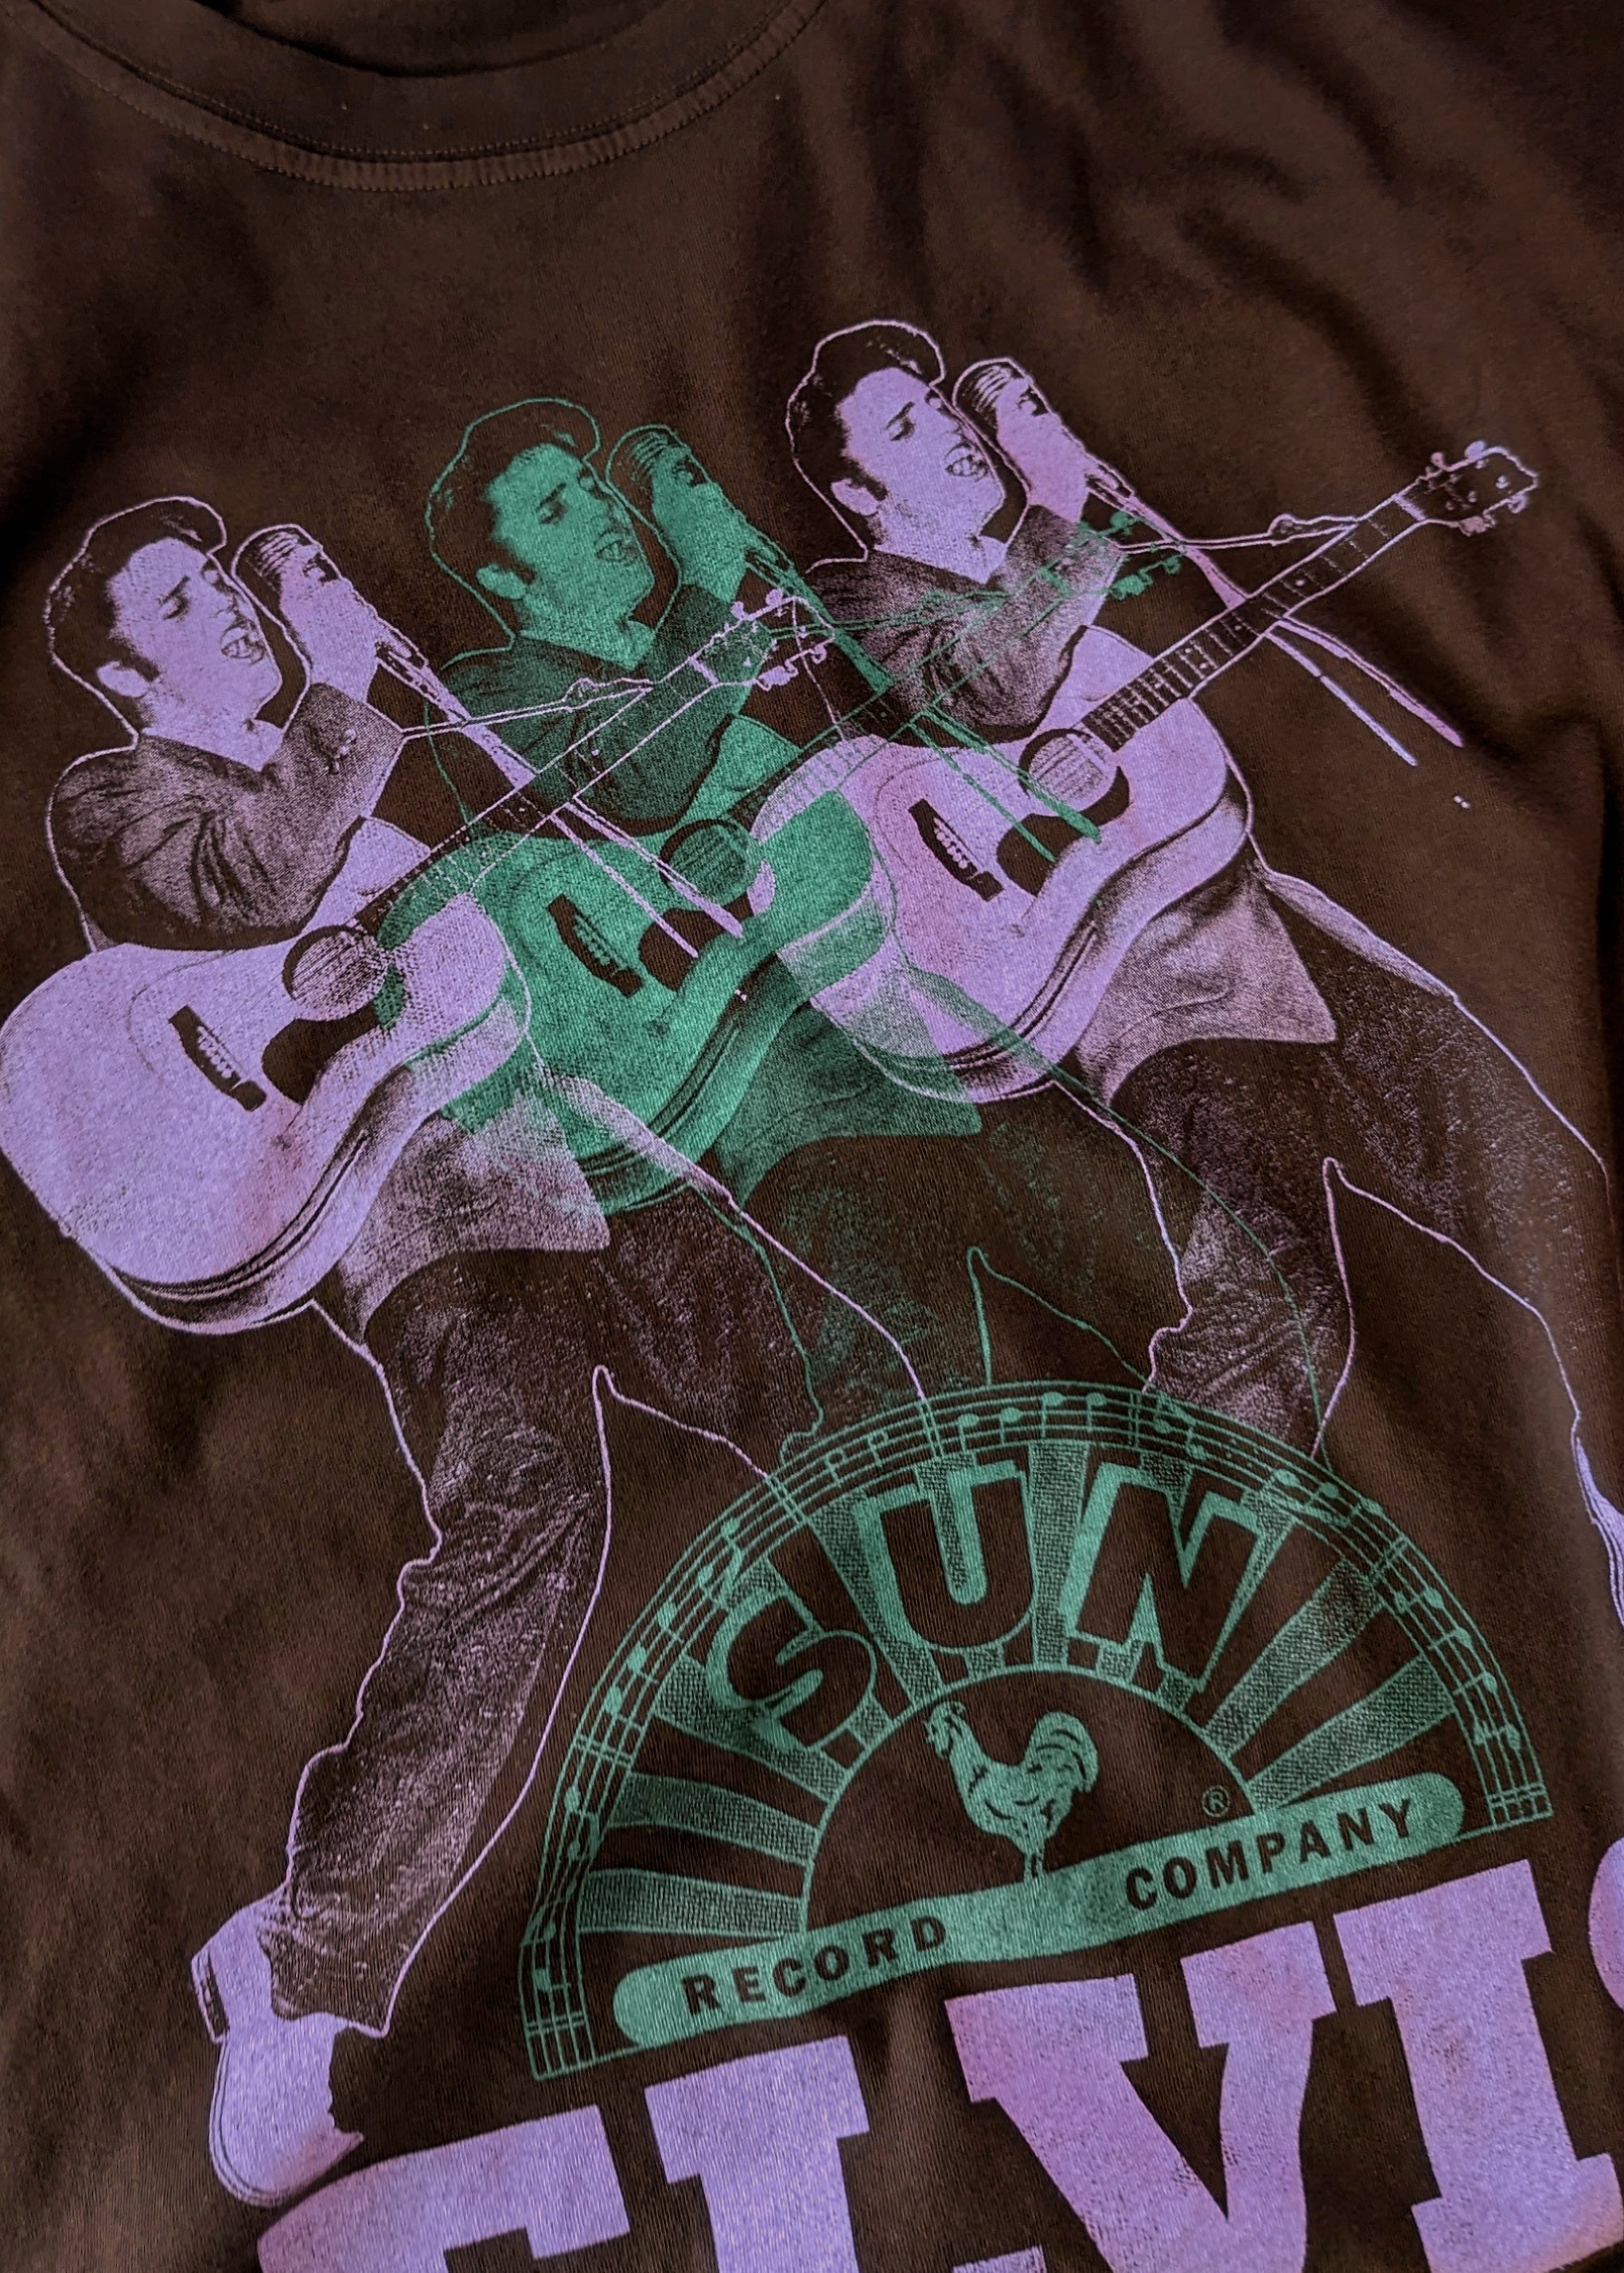 Elvis x Sun Records Repeat One Size Tee